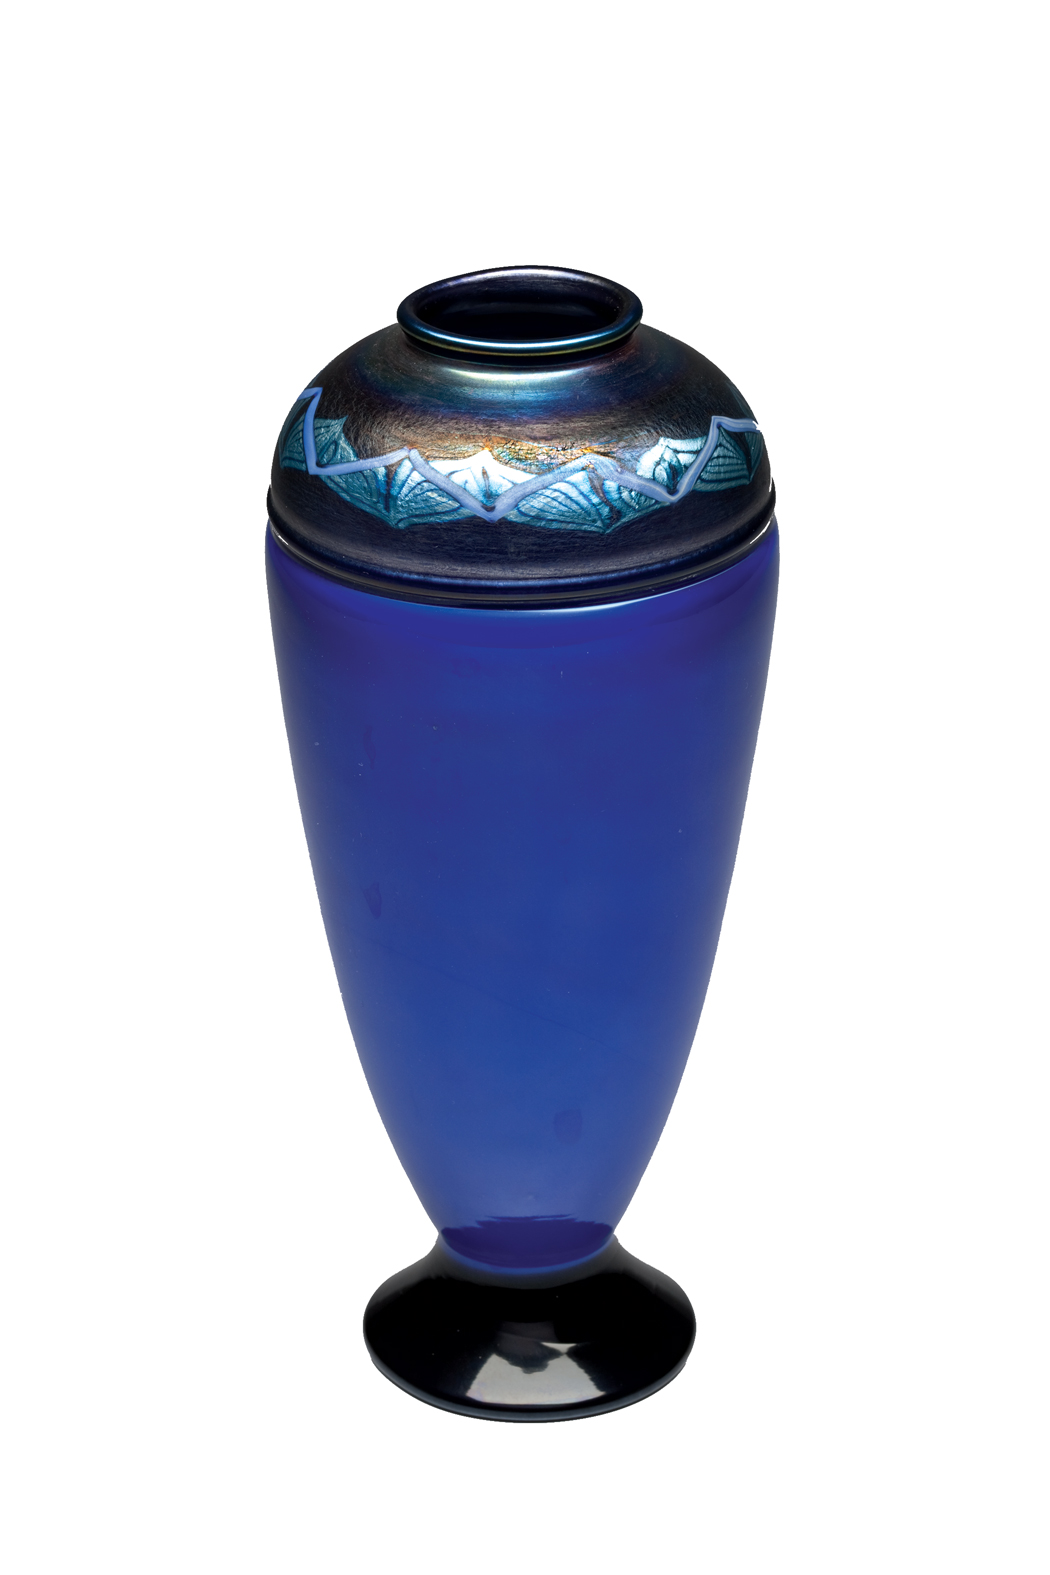 A circa-1921 glass vase by Louis Comfort Tiffany.